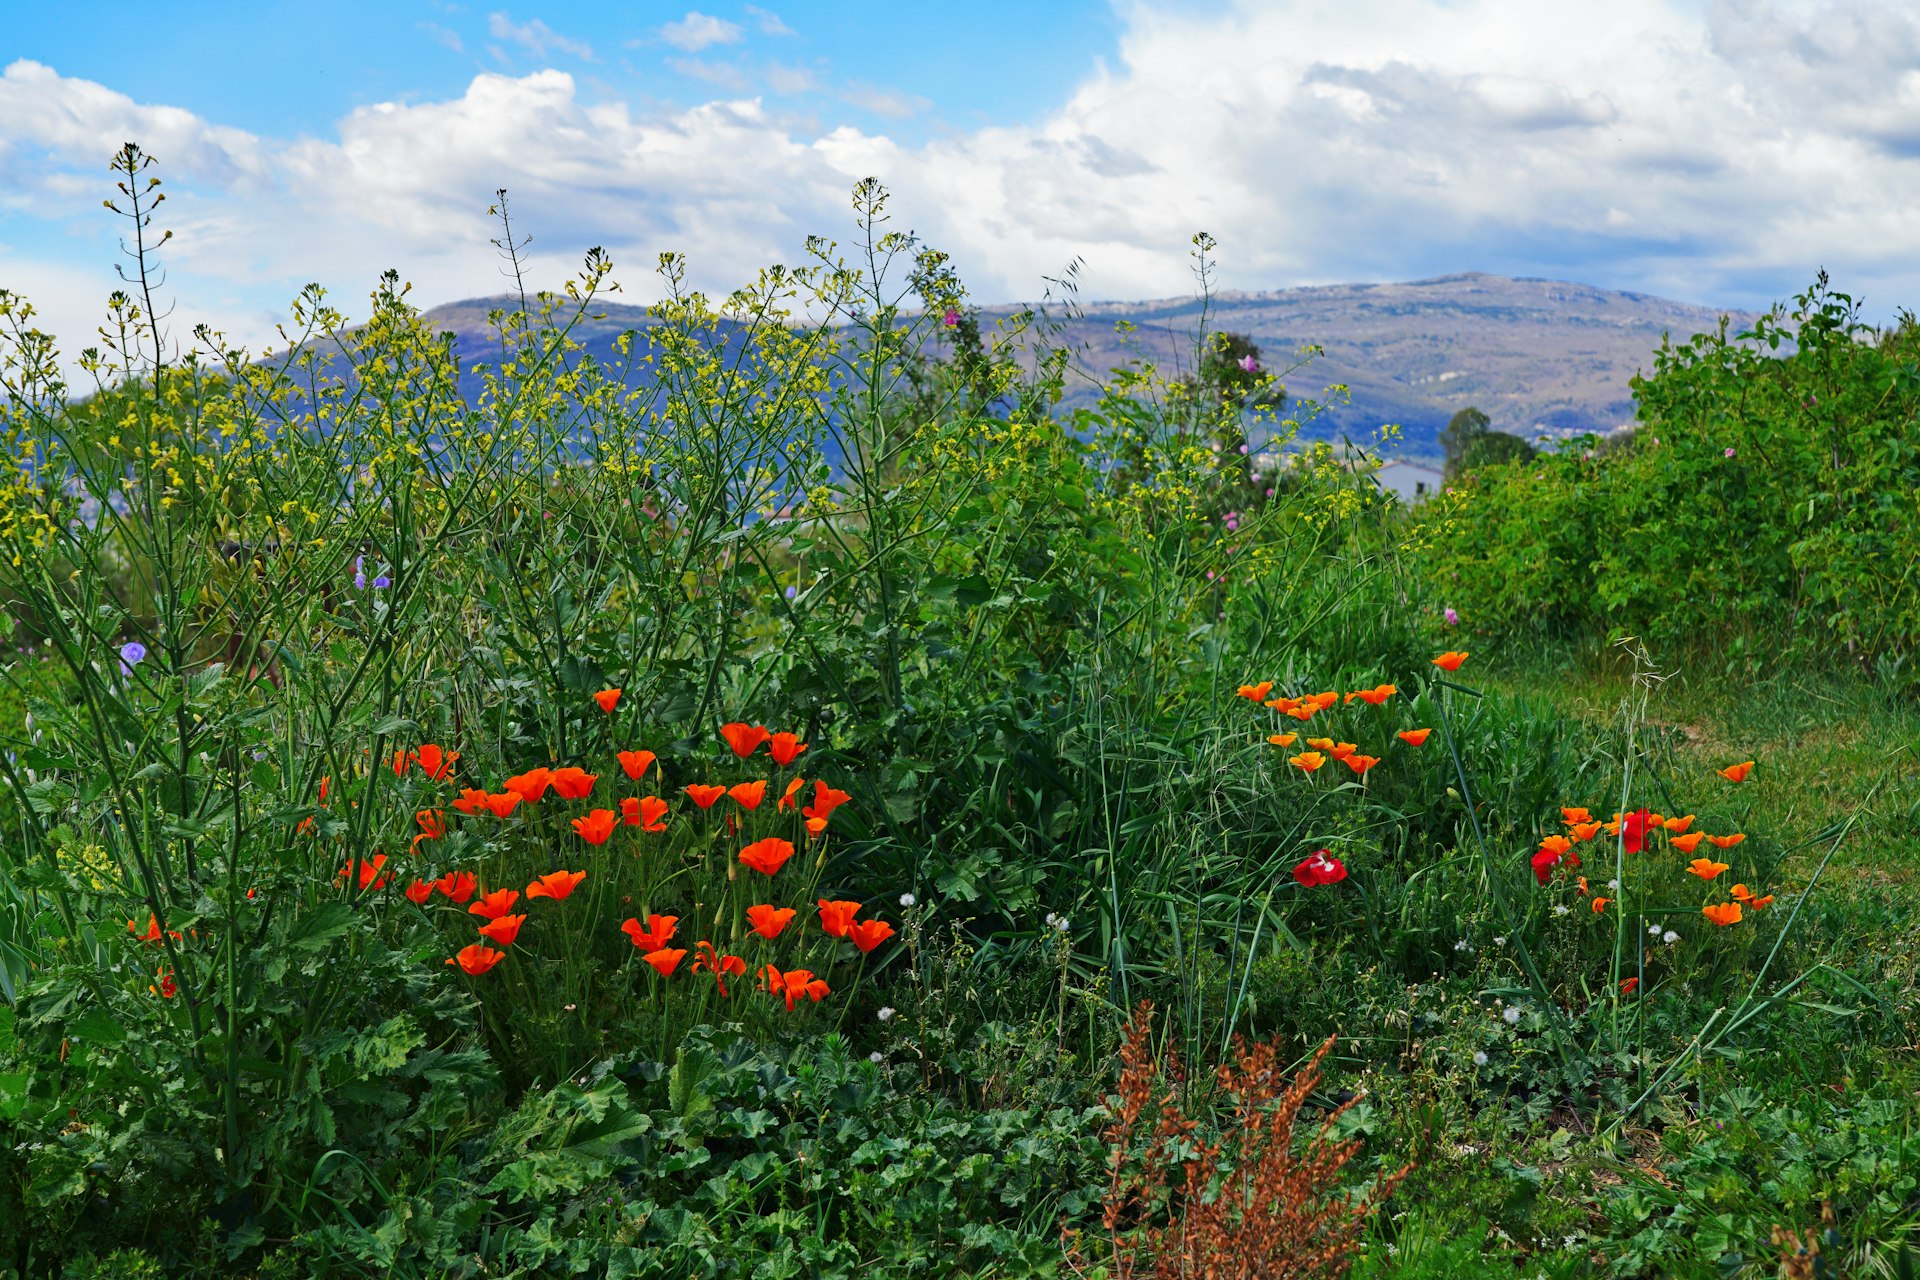 A vivid field of wildflowers with bright orange poppies standing out against the greenery. The scene is set in a rural area with undulating hills in the distance and a dynamic sky above, suggesting the diverse flora of a temperate climate and the beauty of a natural, uncultivated landscape.